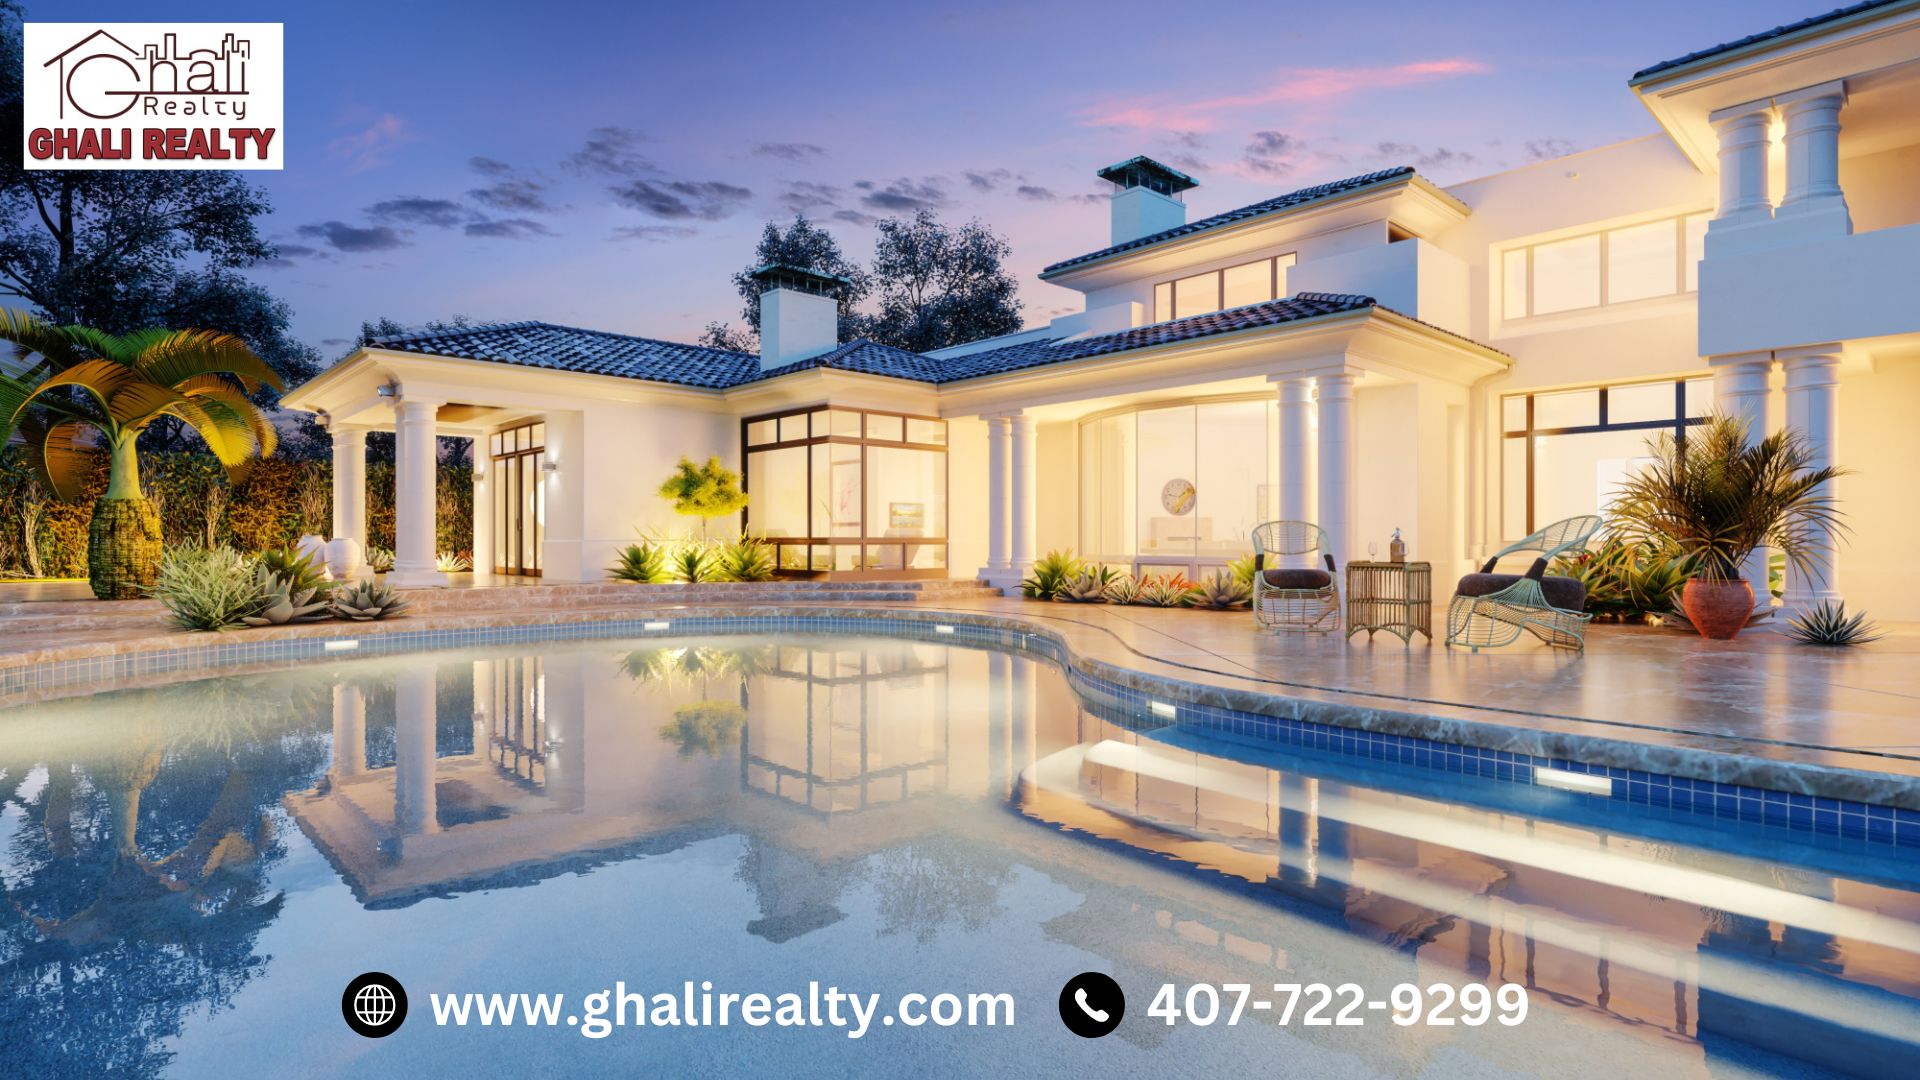 Top Real Estate Agents Orlando - Ghali Realty, Inc.